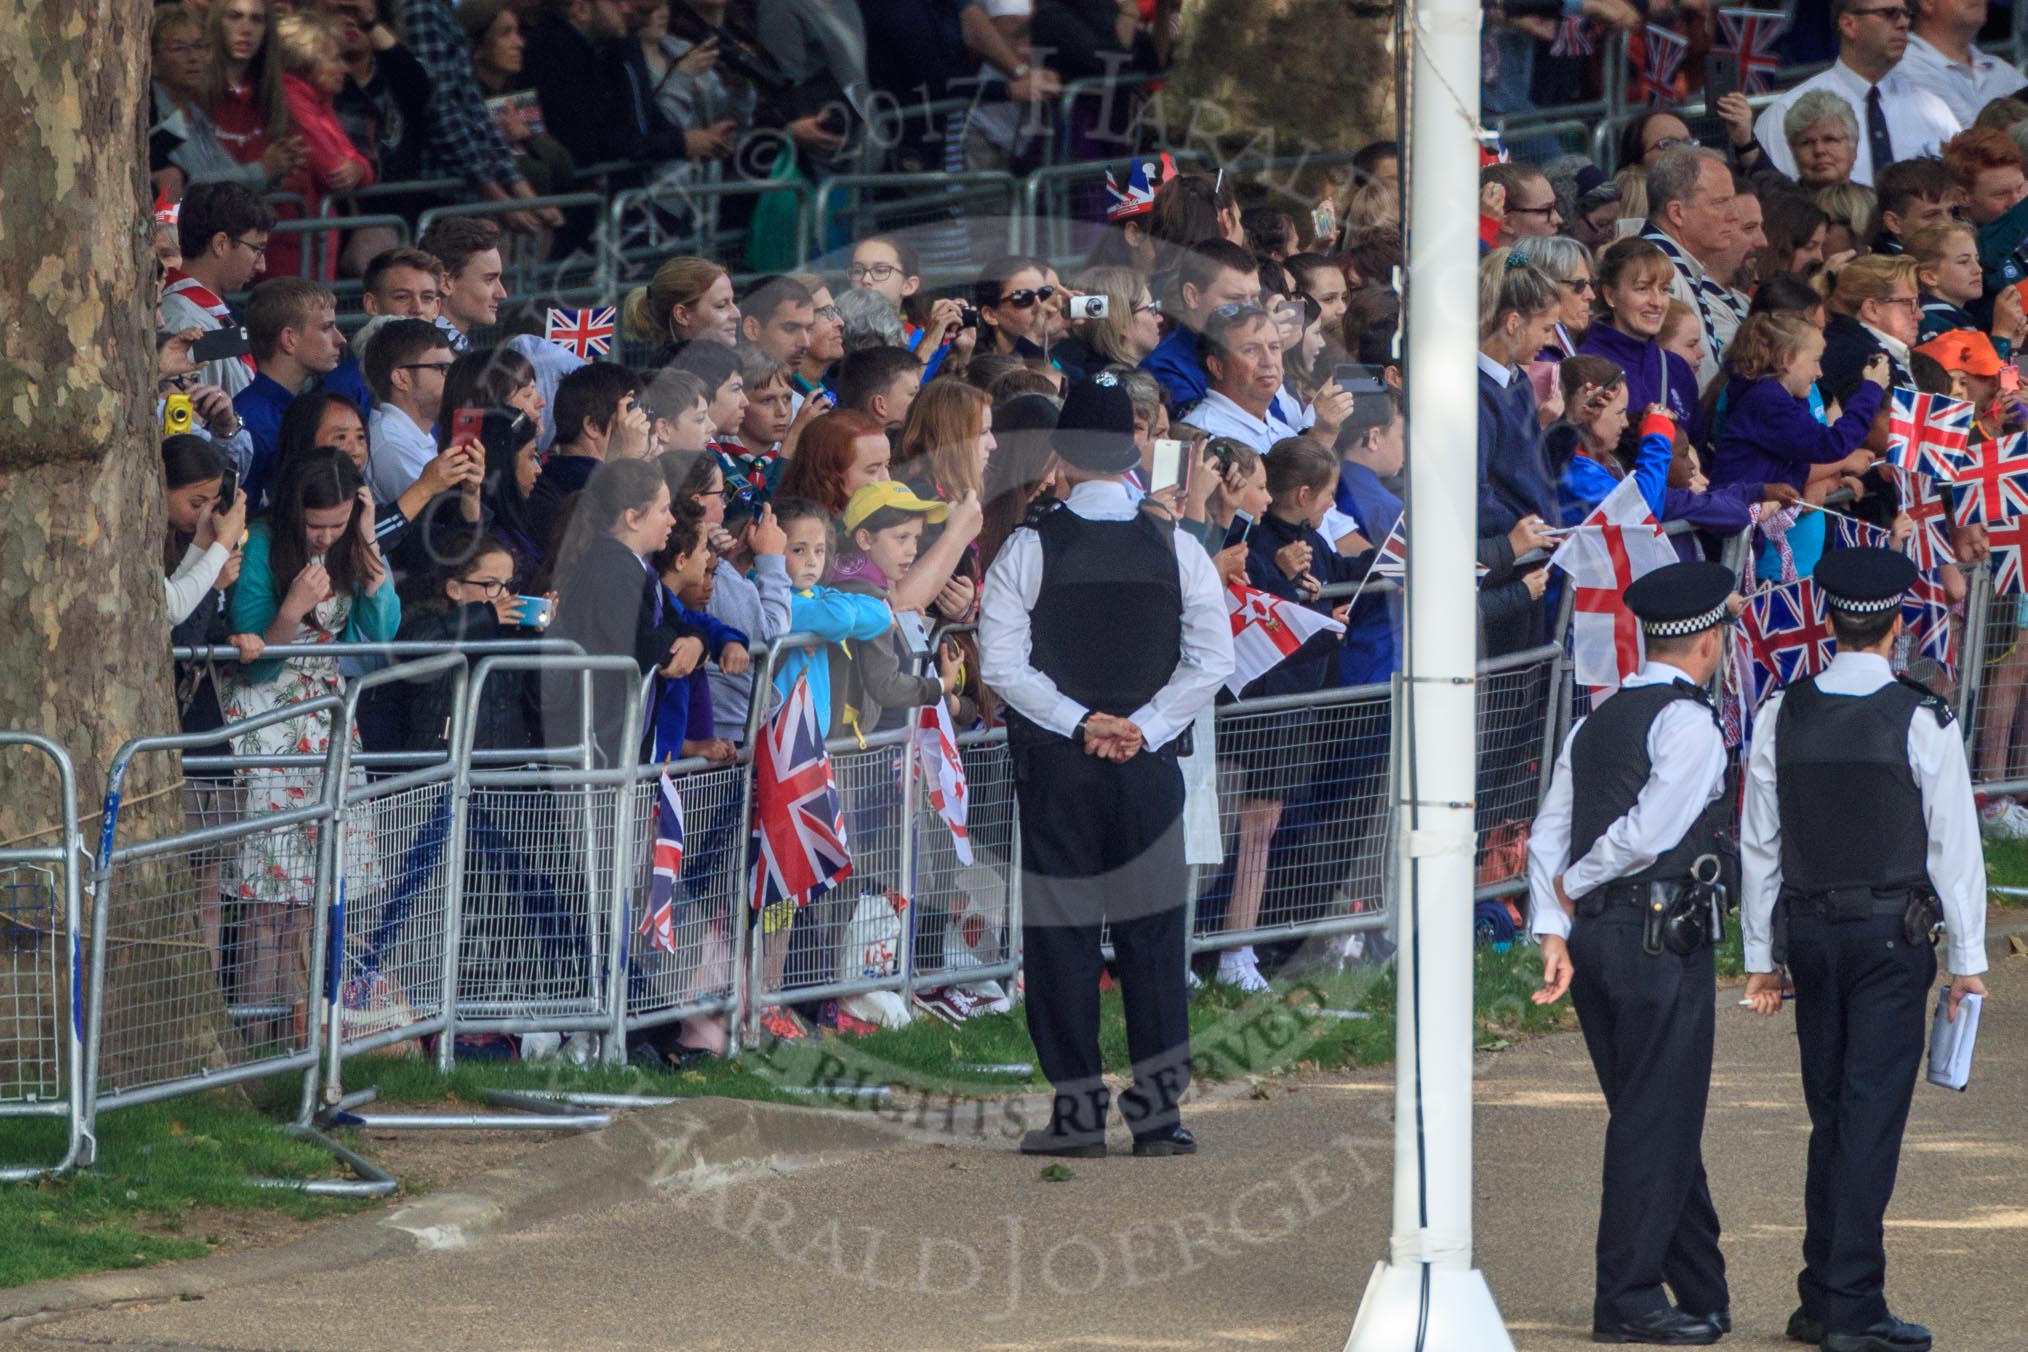 The crowded Youth Enclosure during Trooping the Colour 2018, The Queen's Birthday Parade at Horse Guards Parade, Westminster, London, 9 June 2018, 10:24.